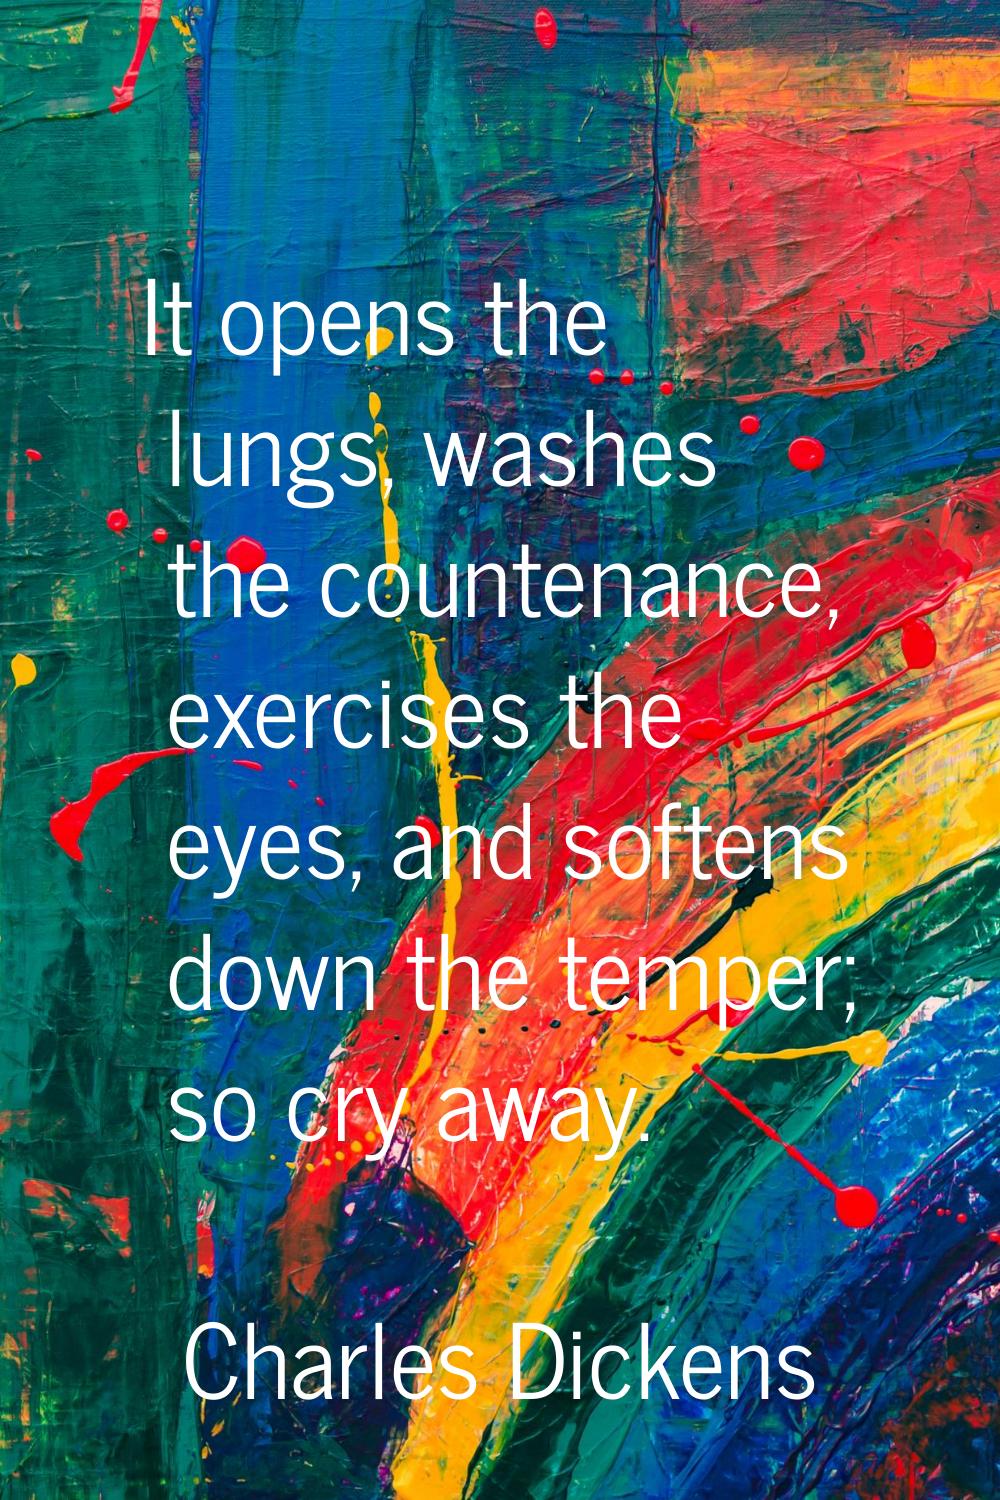 It opens the lungs, washes the countenance, exercises the eyes, and softens down the temper; so cry